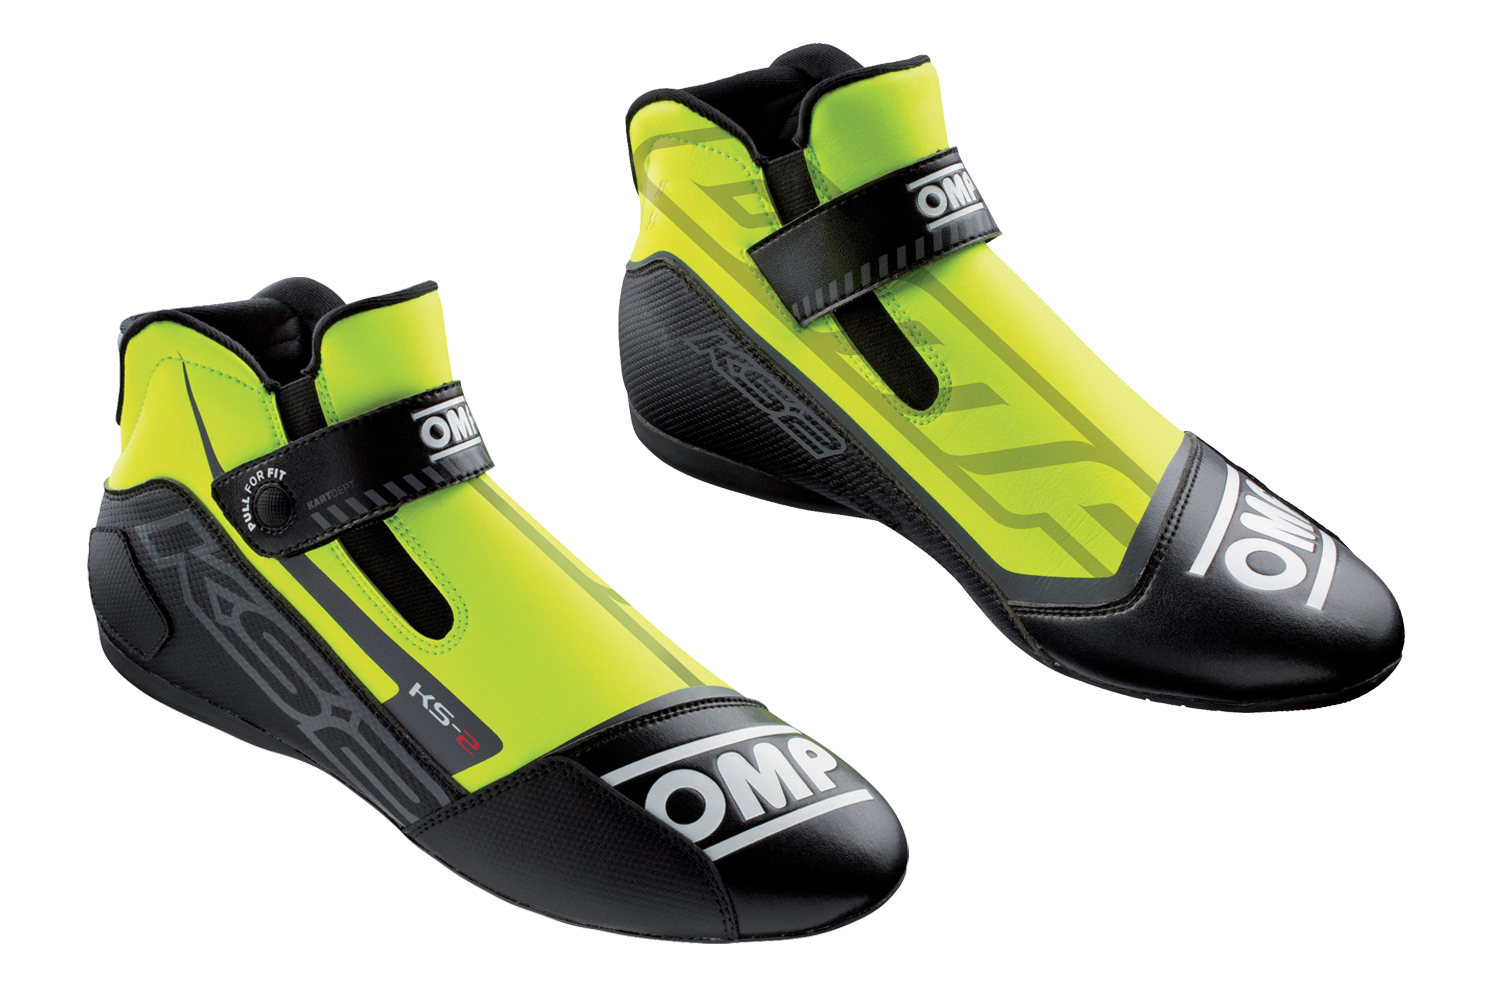 OMP Racing IC82505932 - Shoe, KS-2, Driving, Mid-Top, FIA Approved, Suede Leather Outer, Fire Retardant Fabric Inner, Fluorescent Yellow / Black, Euro Size 32, Pair